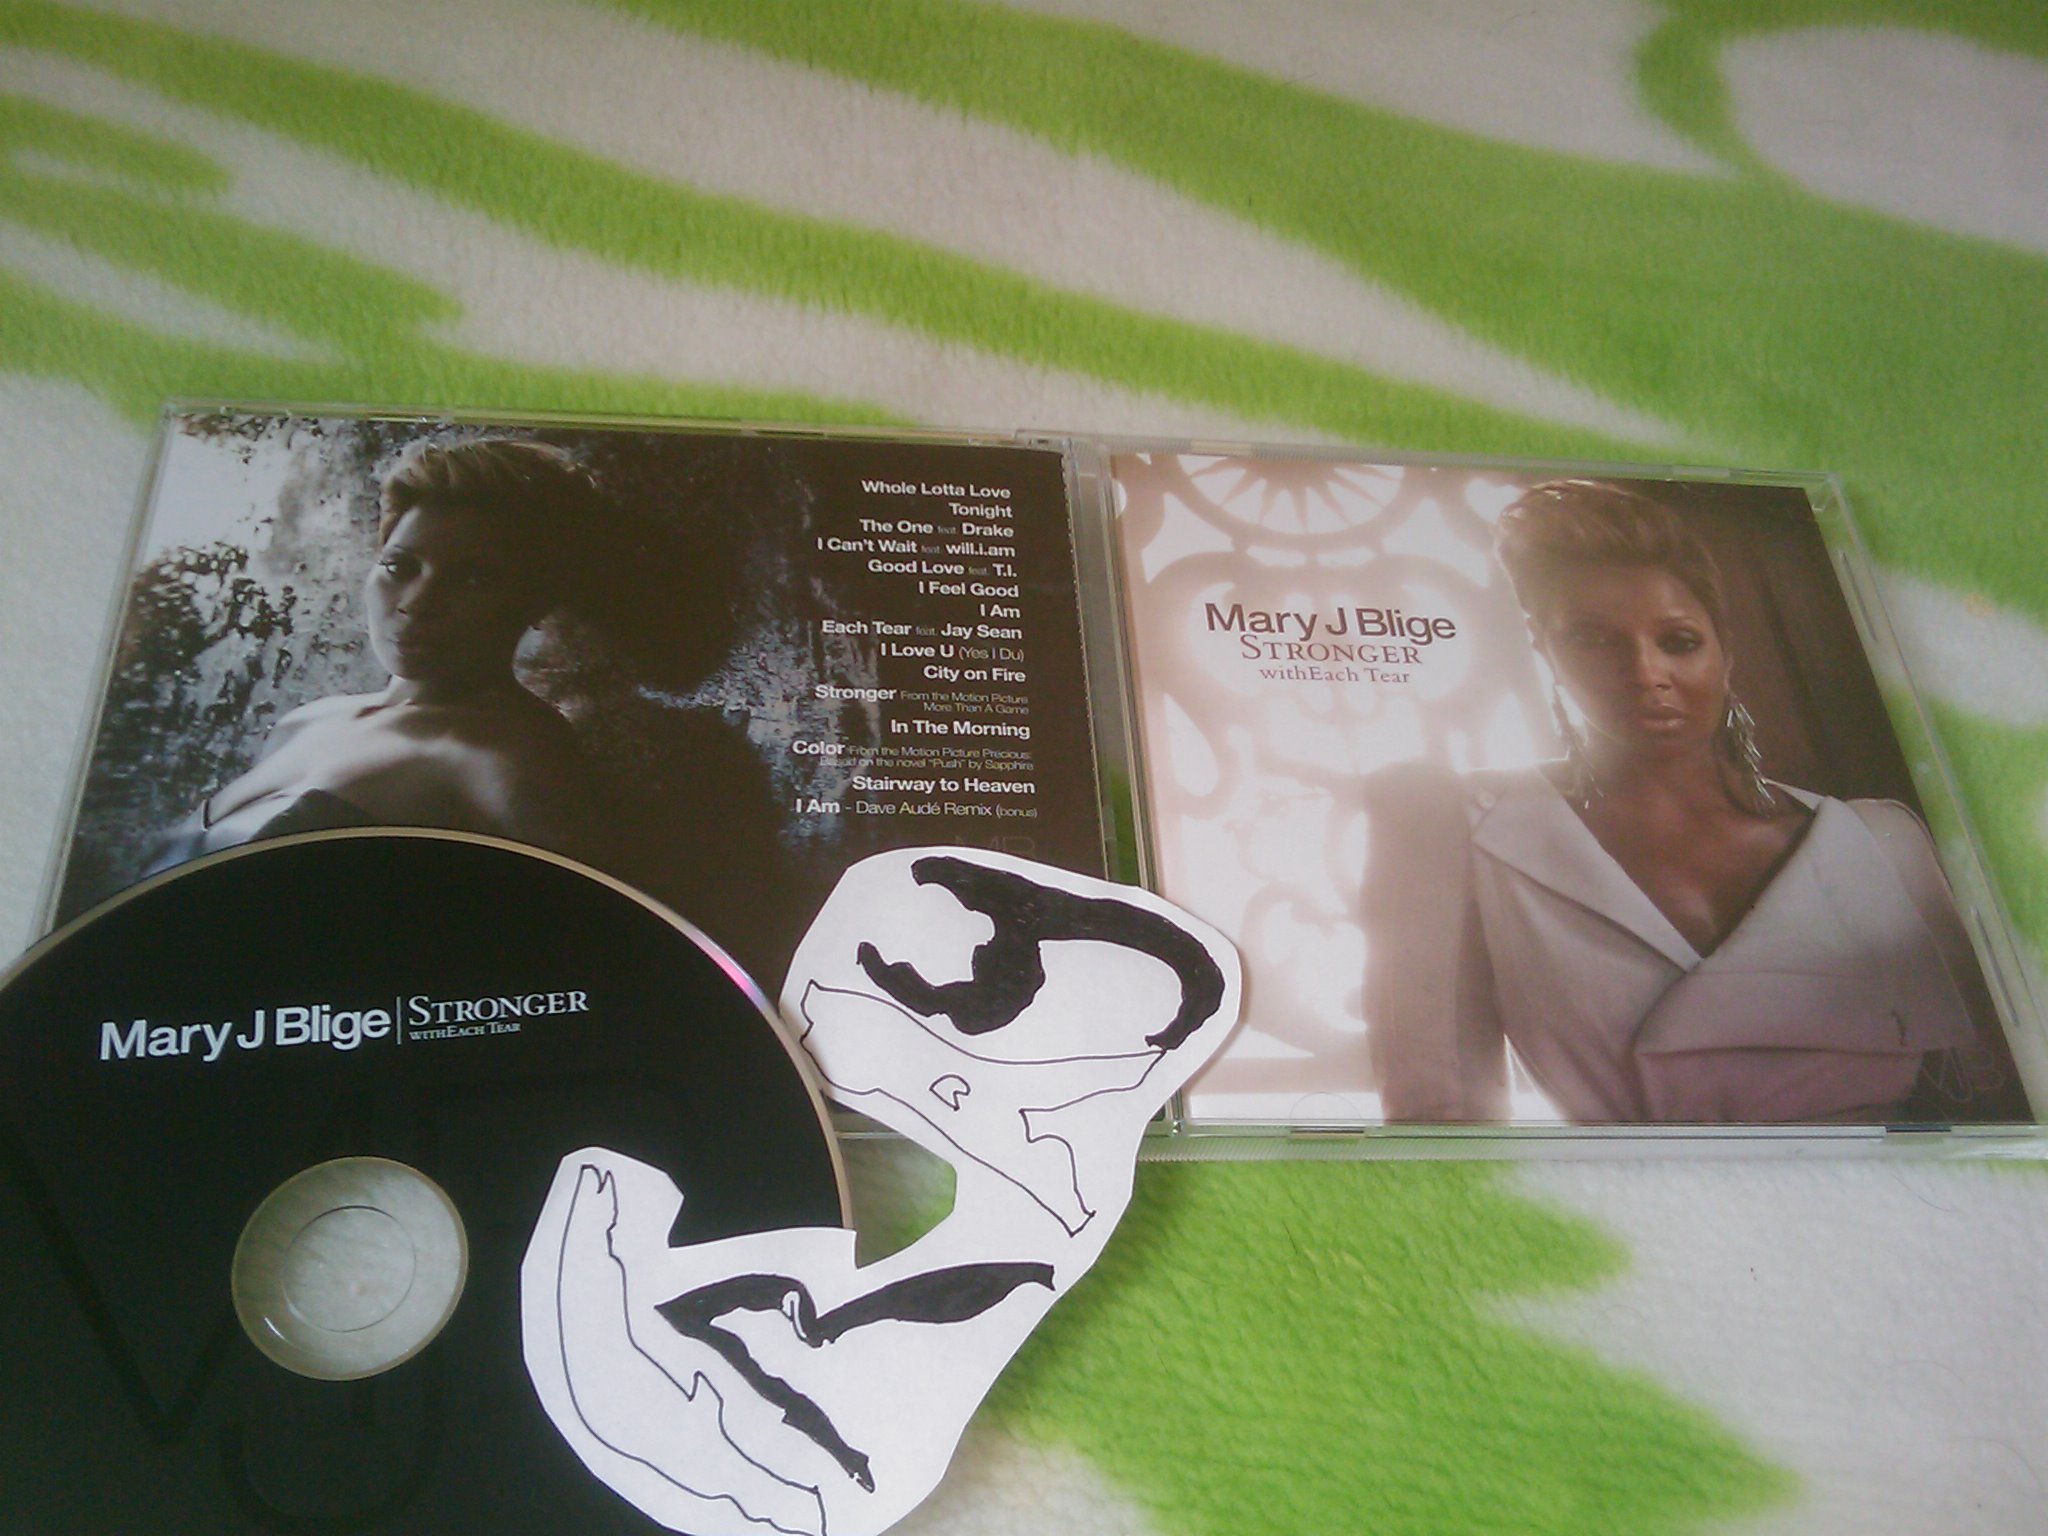 Cover Album of MaryJ.Blige-Stronger Witheach Tear (E.U.Edition)-2010